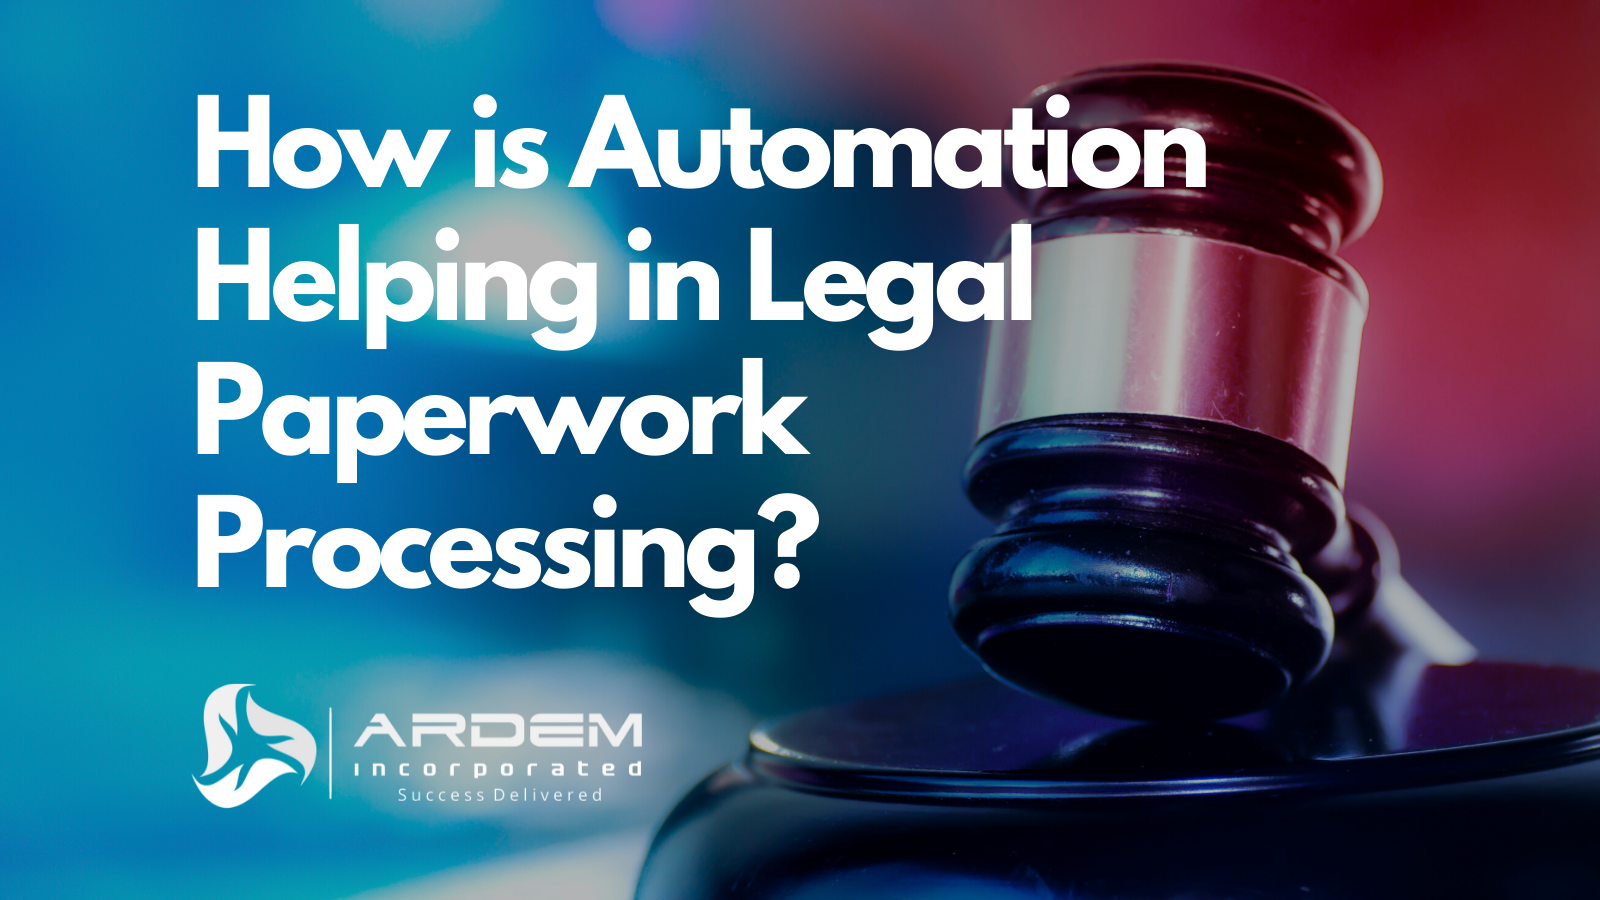 Legal Outsourcing Paperwork Processing Automation Blog